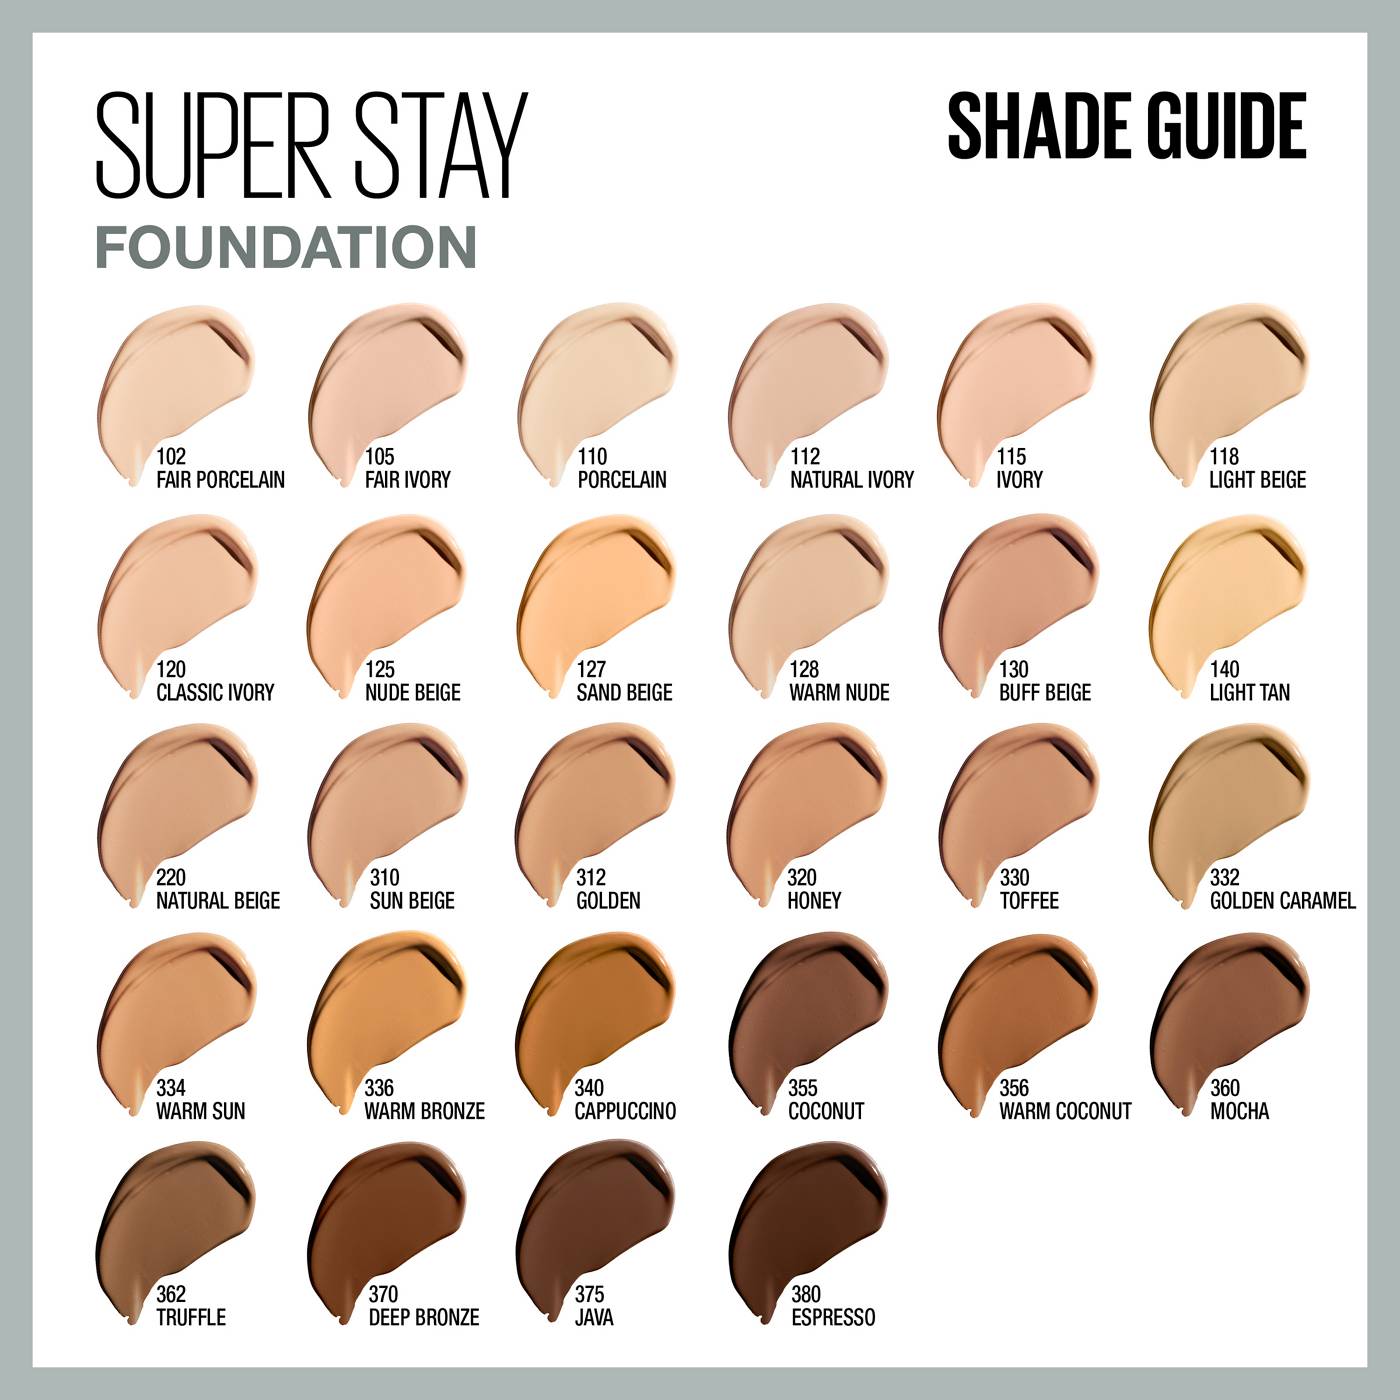 Maybelline Super Stay 24H Full Coverage Foundation - Light Tan